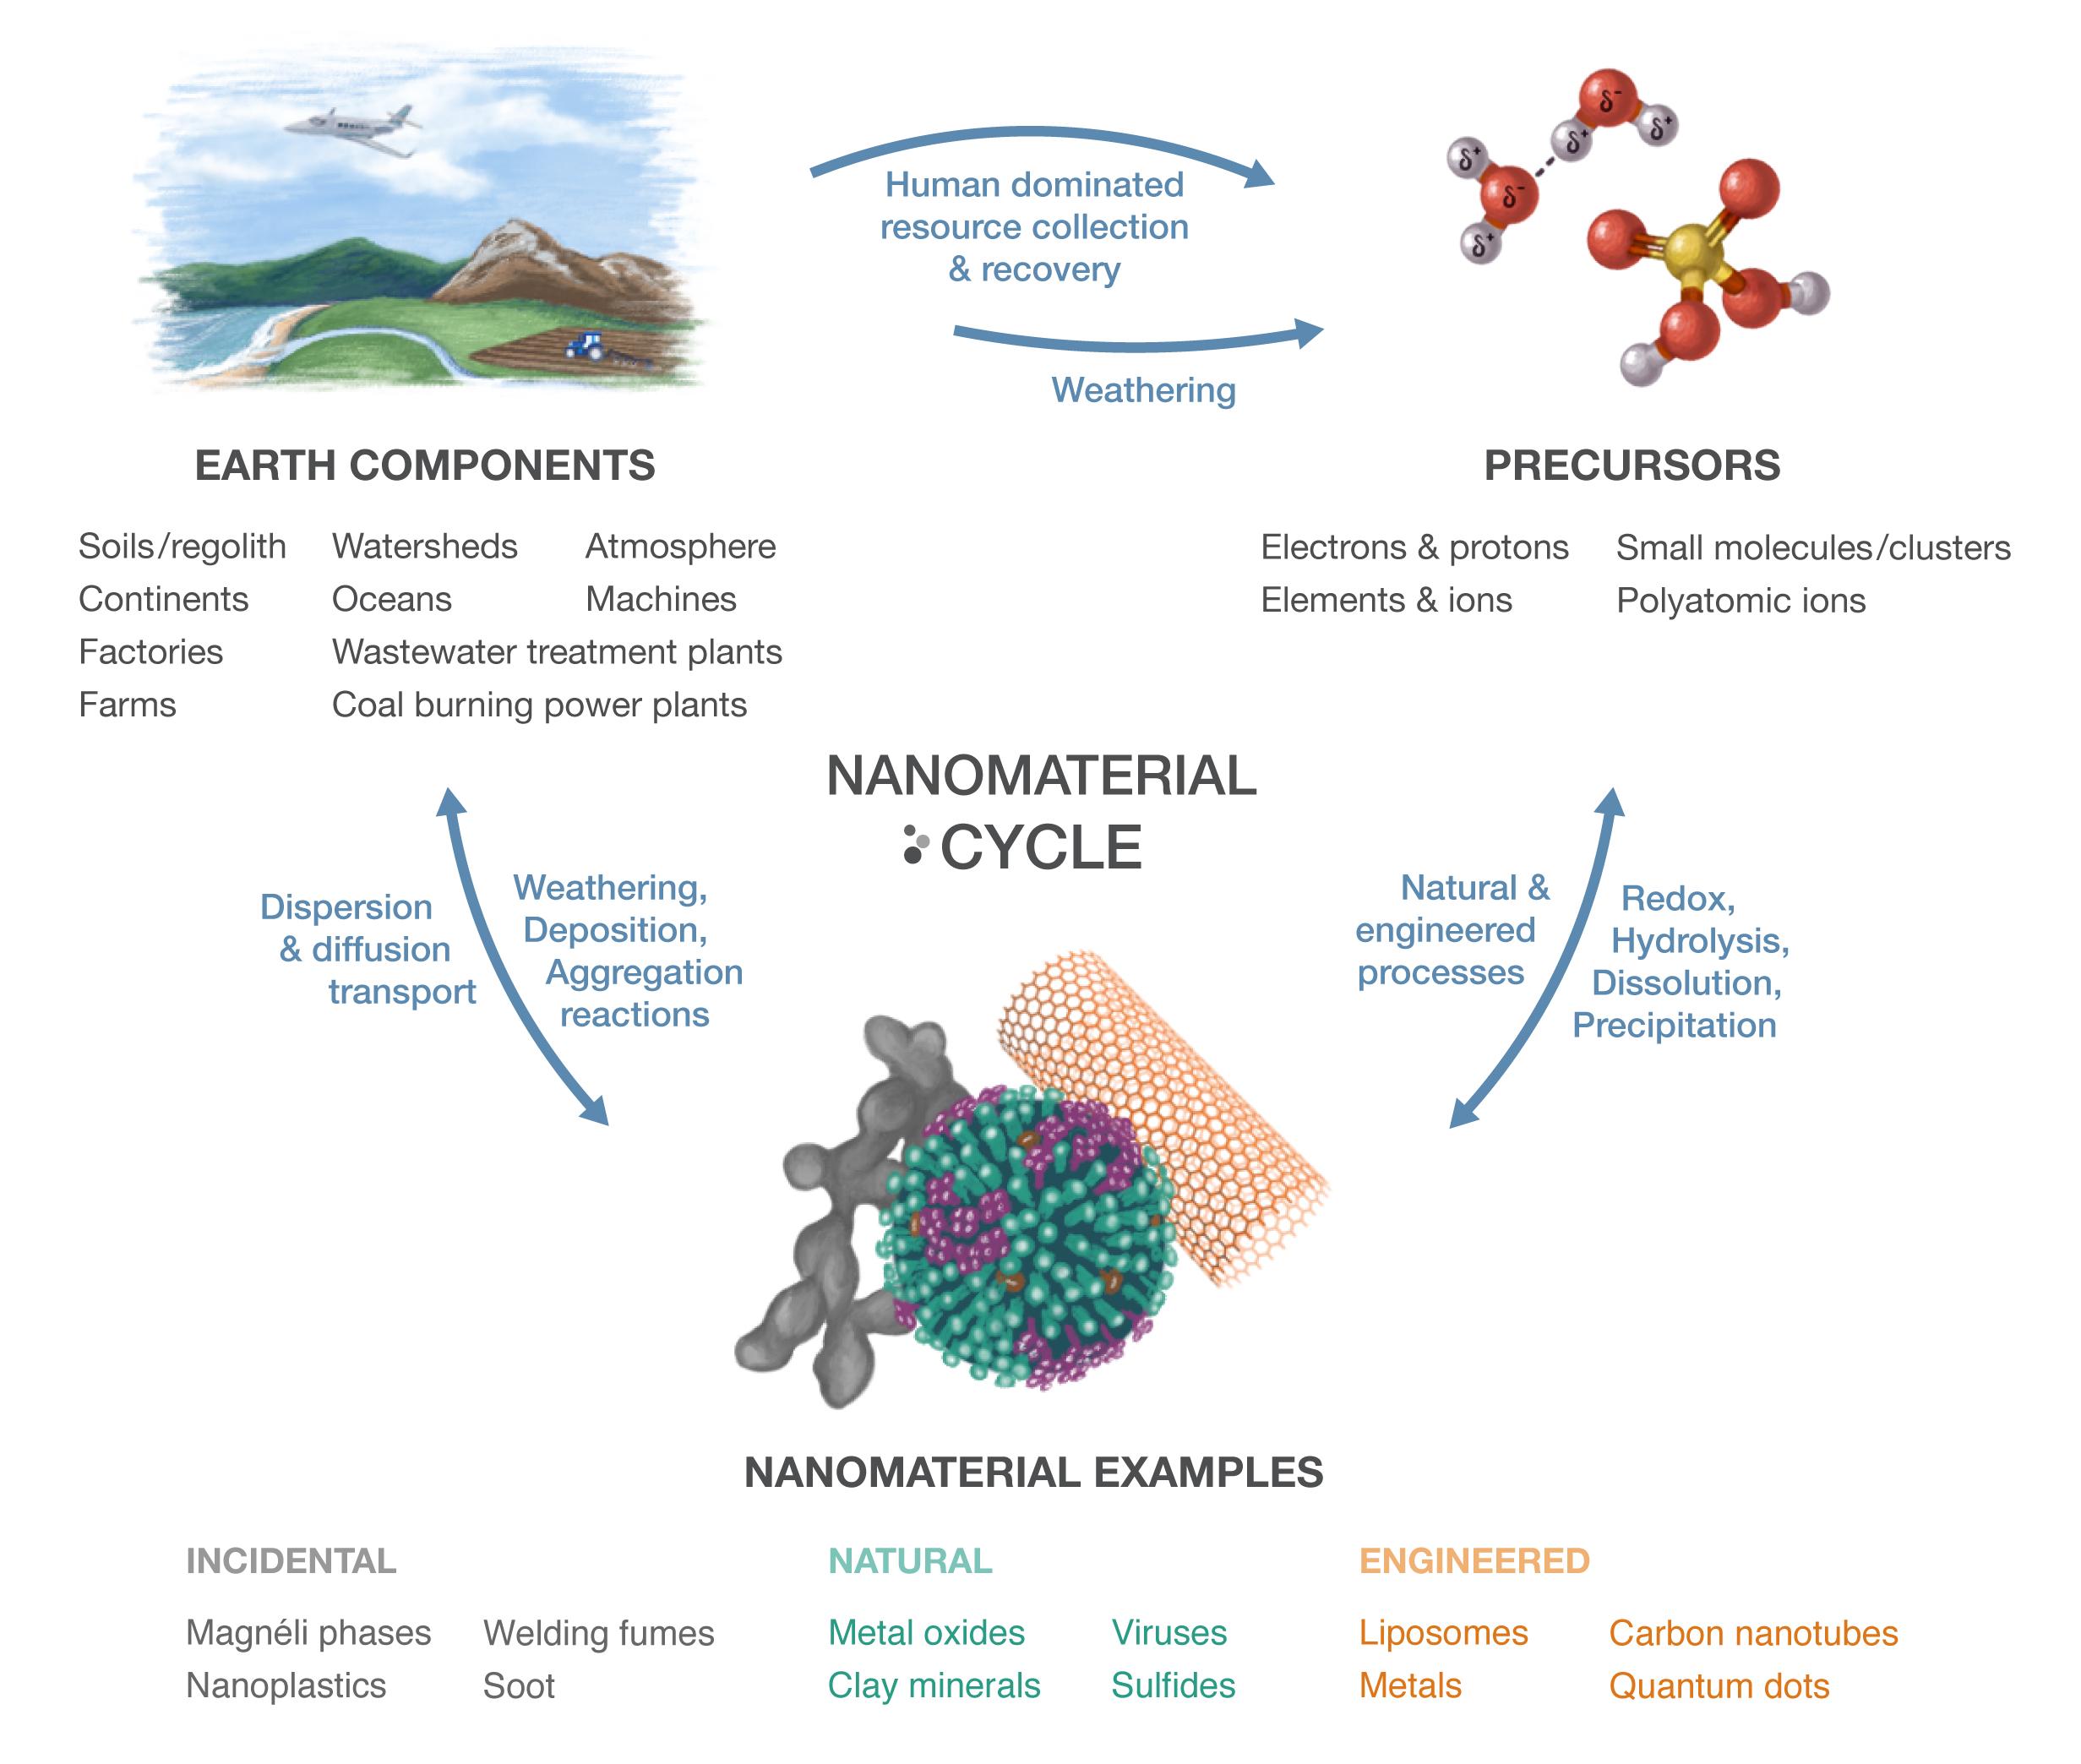 A graphic showing how three kinds of nanomaterials are connected in a cycle.